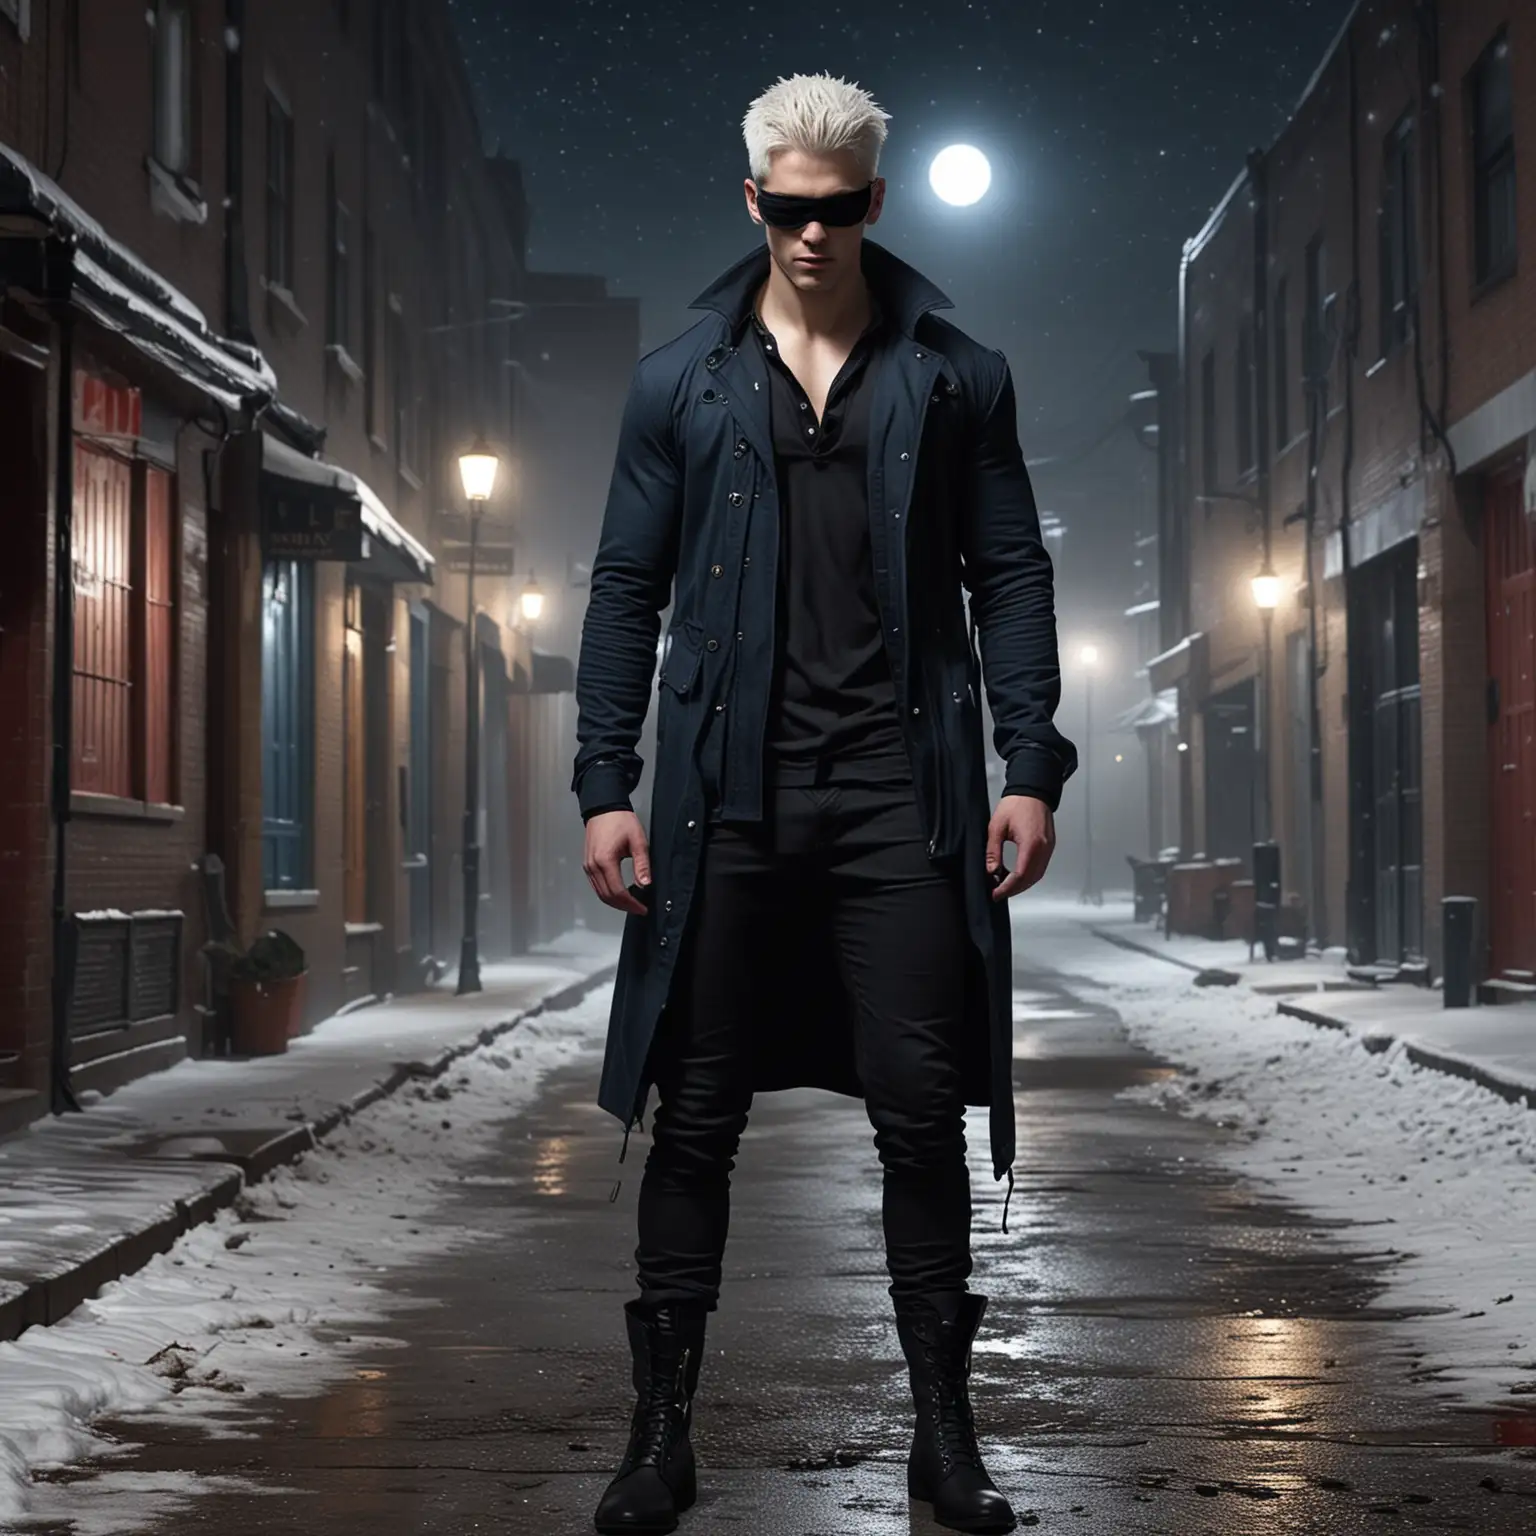 male, a very tall, lean and muscular man relatively attractive, snow-white hair, covers his eyes with a black blindfold which props up his hair and gives it a spikier appearance wearing dark blue zip-up jacket with a high collar, slim-fit matching black pants and black dress boots, dark street with blood-red moon and shadows on background, midnight, hyper-realistic, photo-realistic